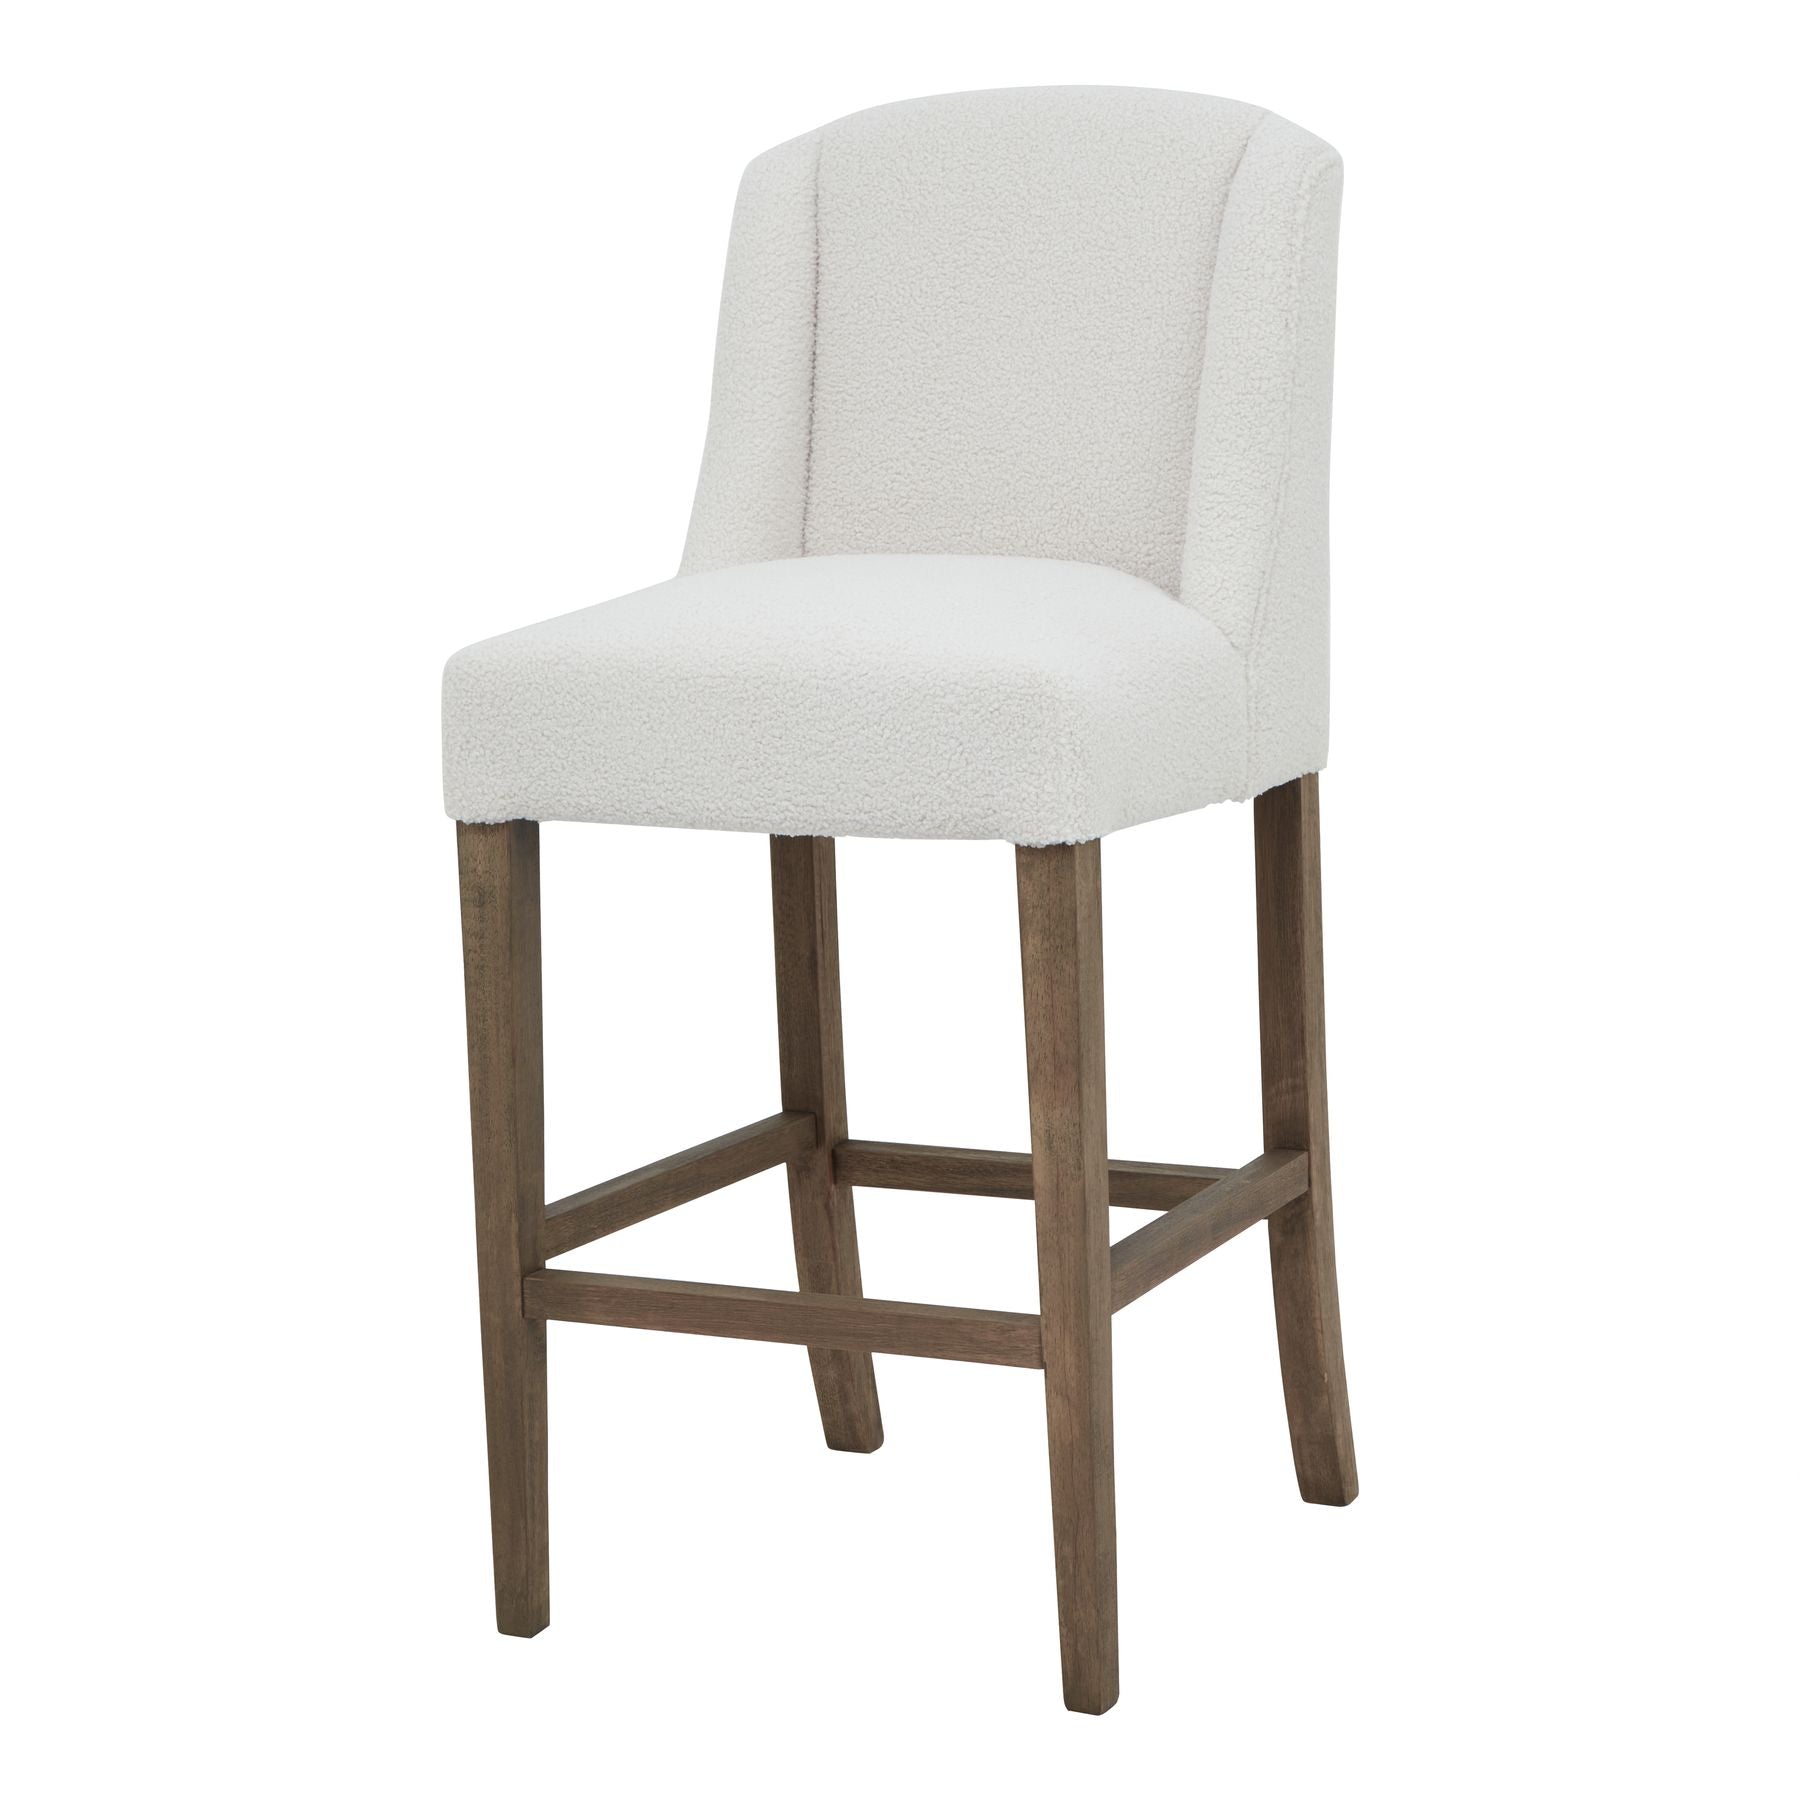 View Compton Boucle Barstool information